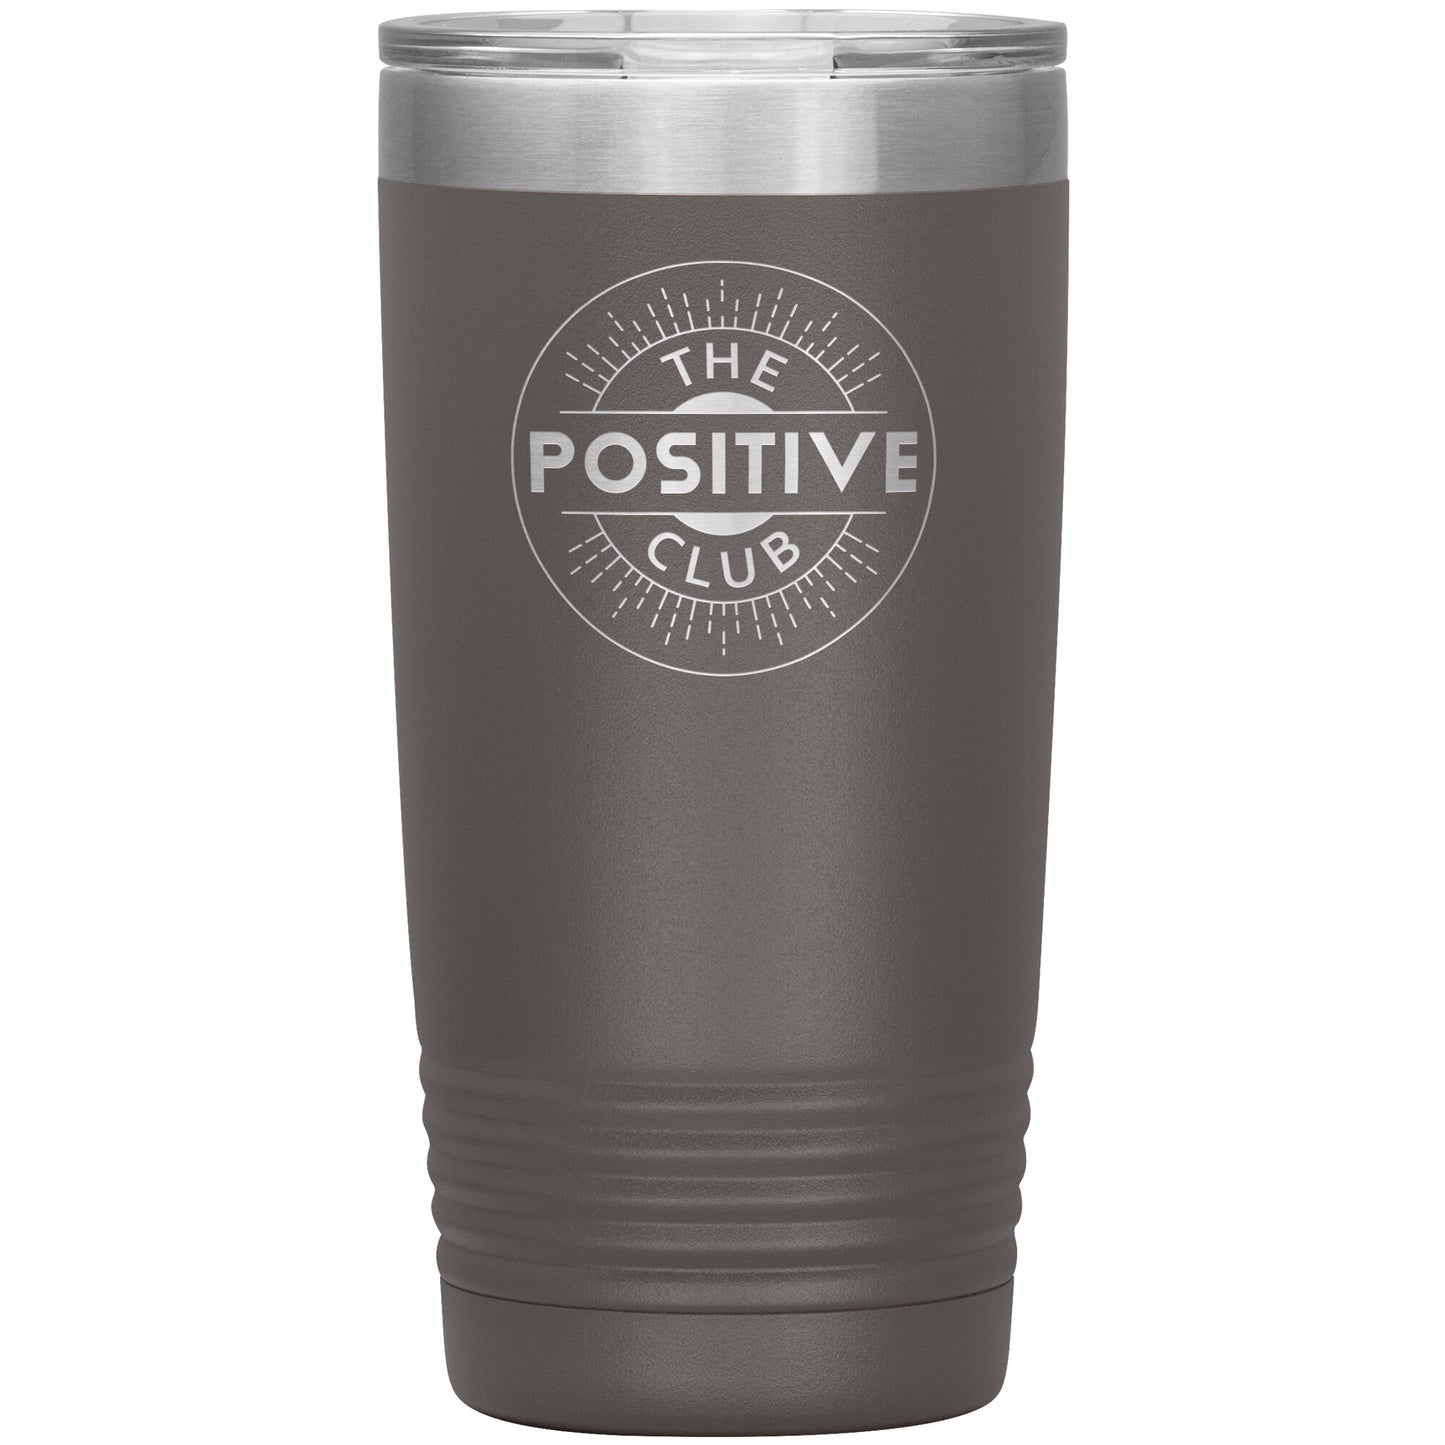 12oz Wine Insulated Tumbler The Positive Club ( Free Shipping )